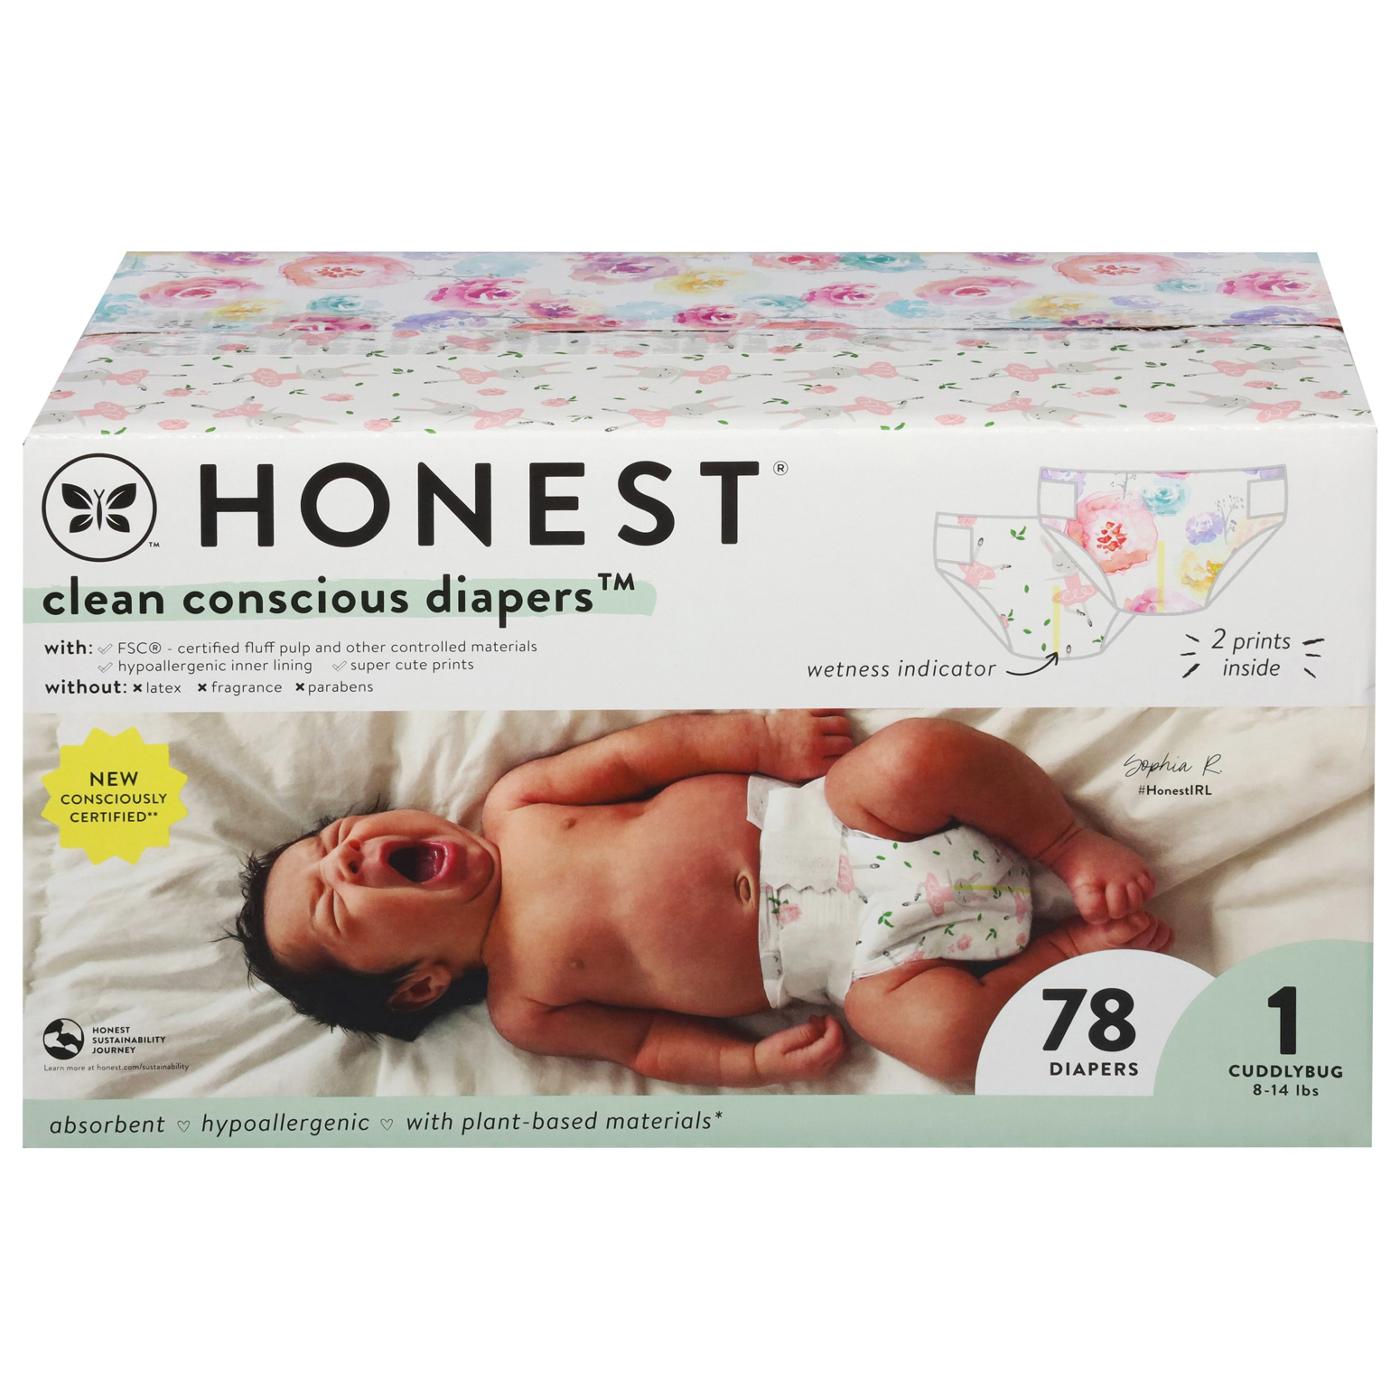 The Honest Company Clean Conscious Diapers Club Box - Size 1, 2 Print Pack; image 1 of 3